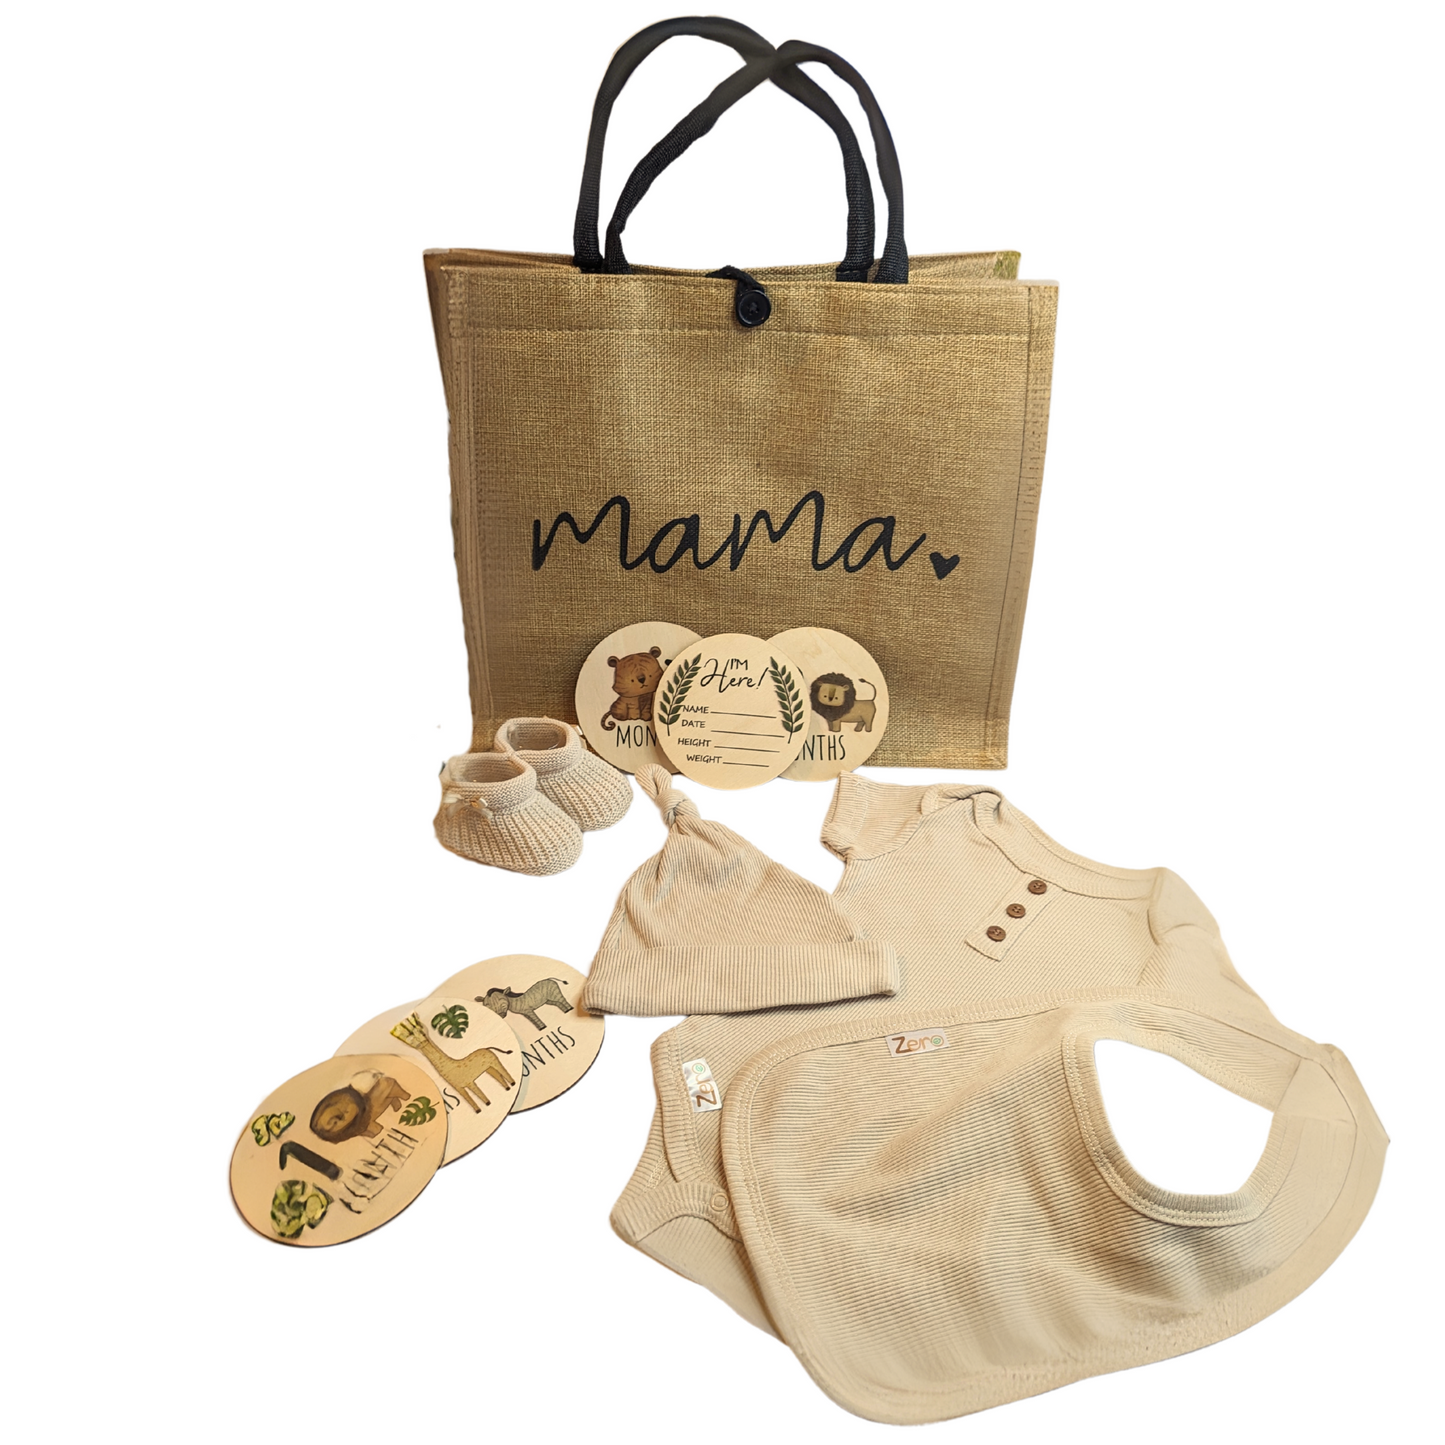 Gift hamper for mummy to be featuring a hessian bag, safari milestone discs, eco-friendly baby clothes, and knit booties